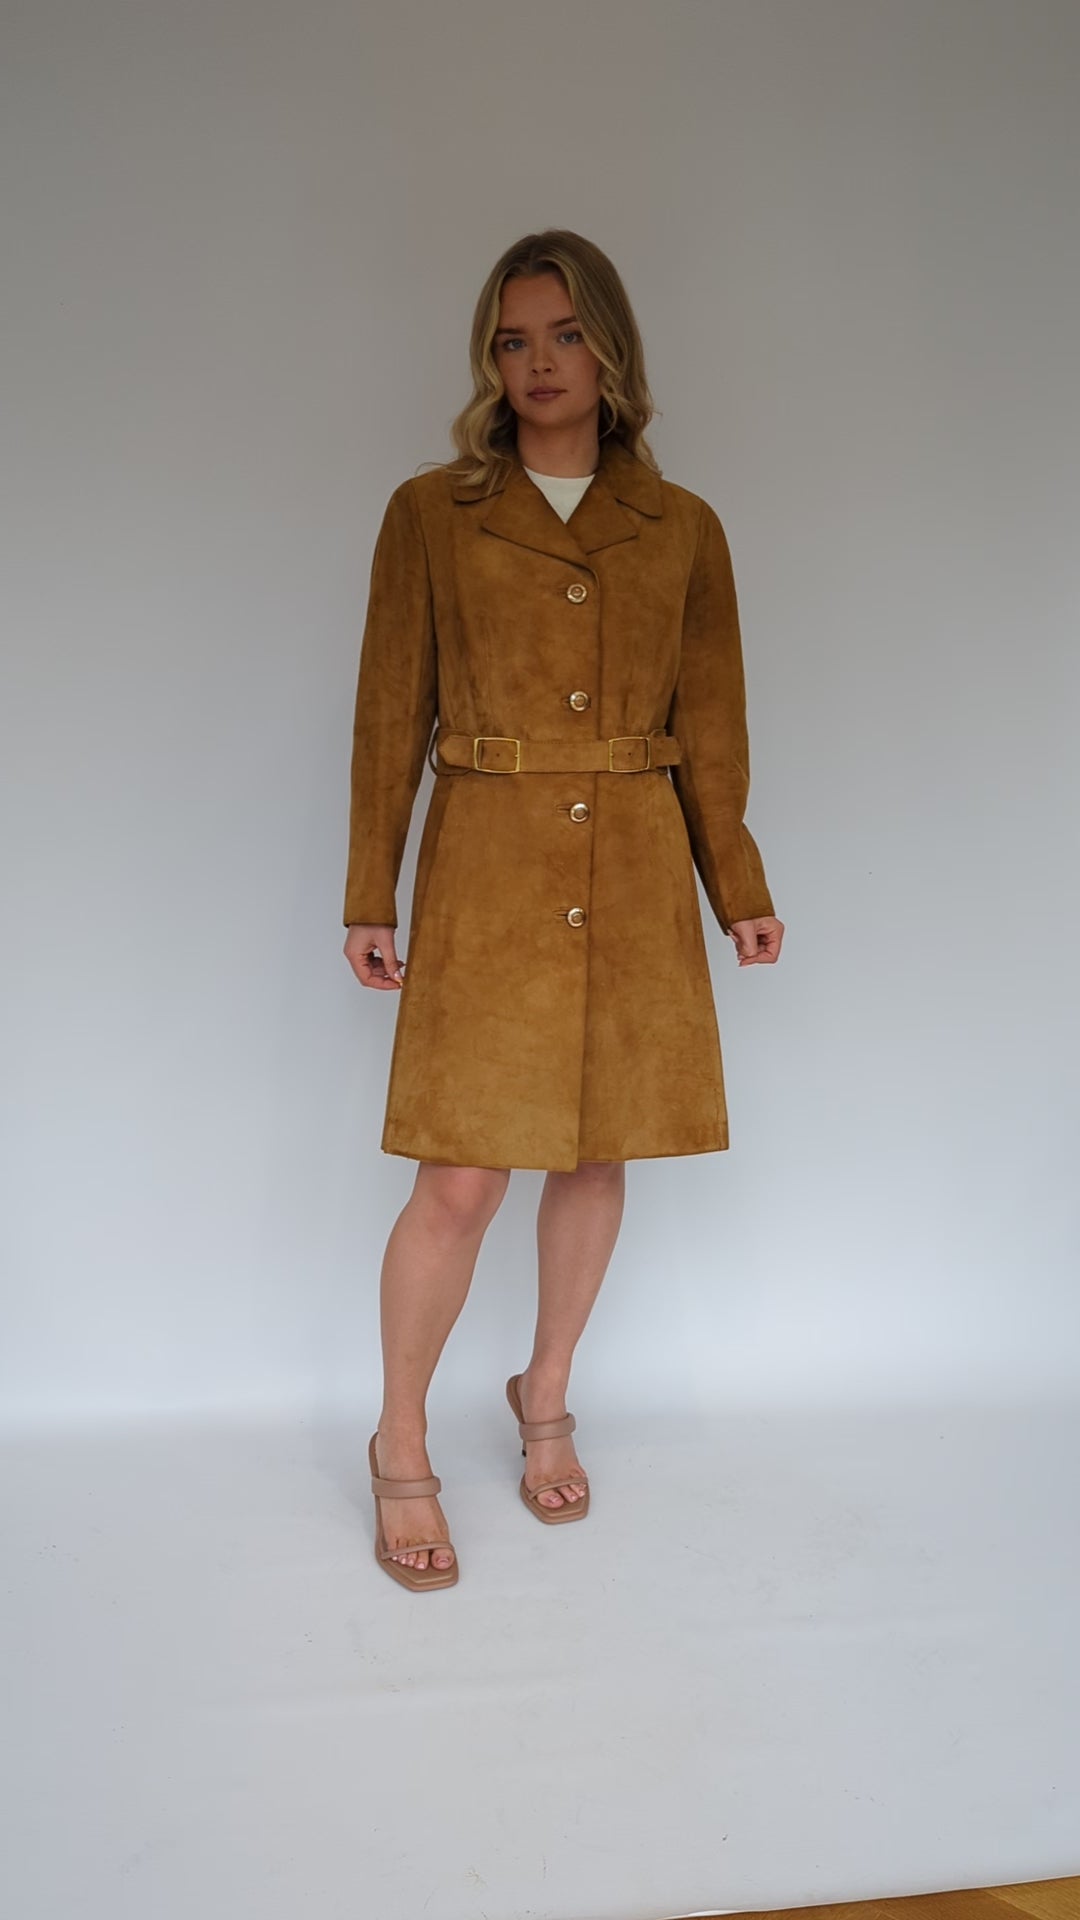 video showing 70s long tan suede ladies coat with gold buttons